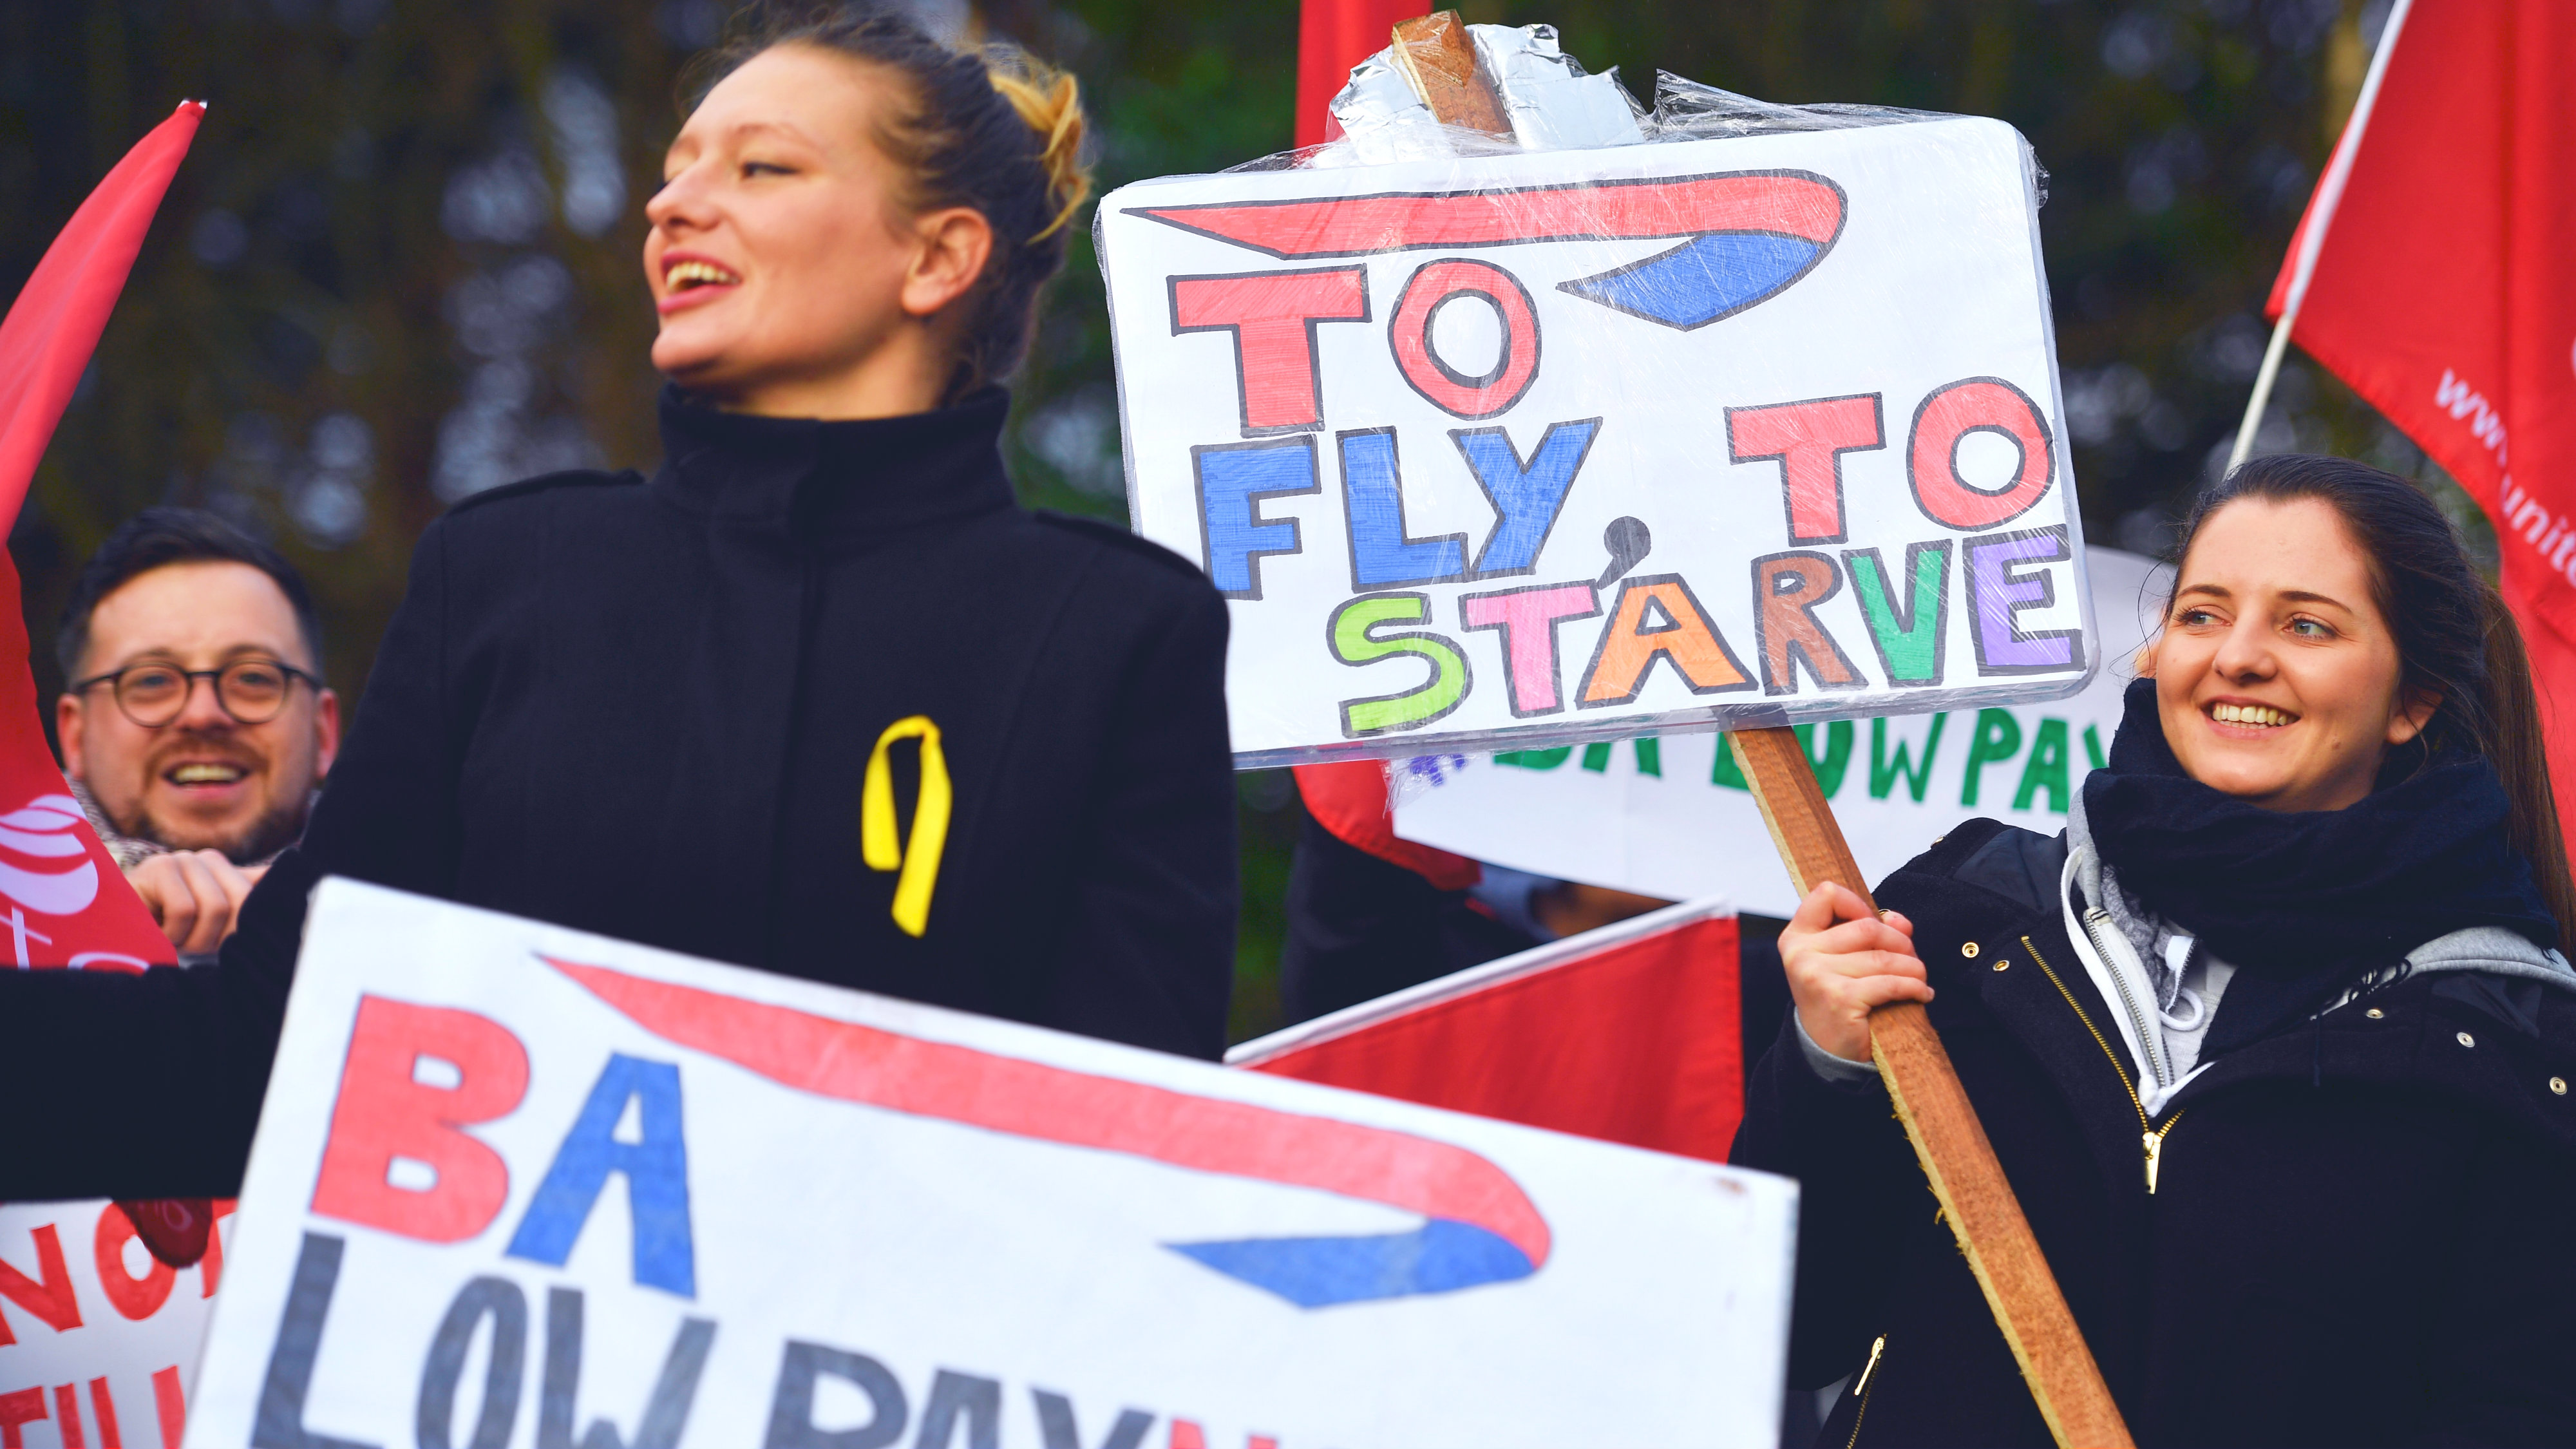 British Airways cabin crew demonstrate outside Glasgow Airport during a two-day strike against low pay